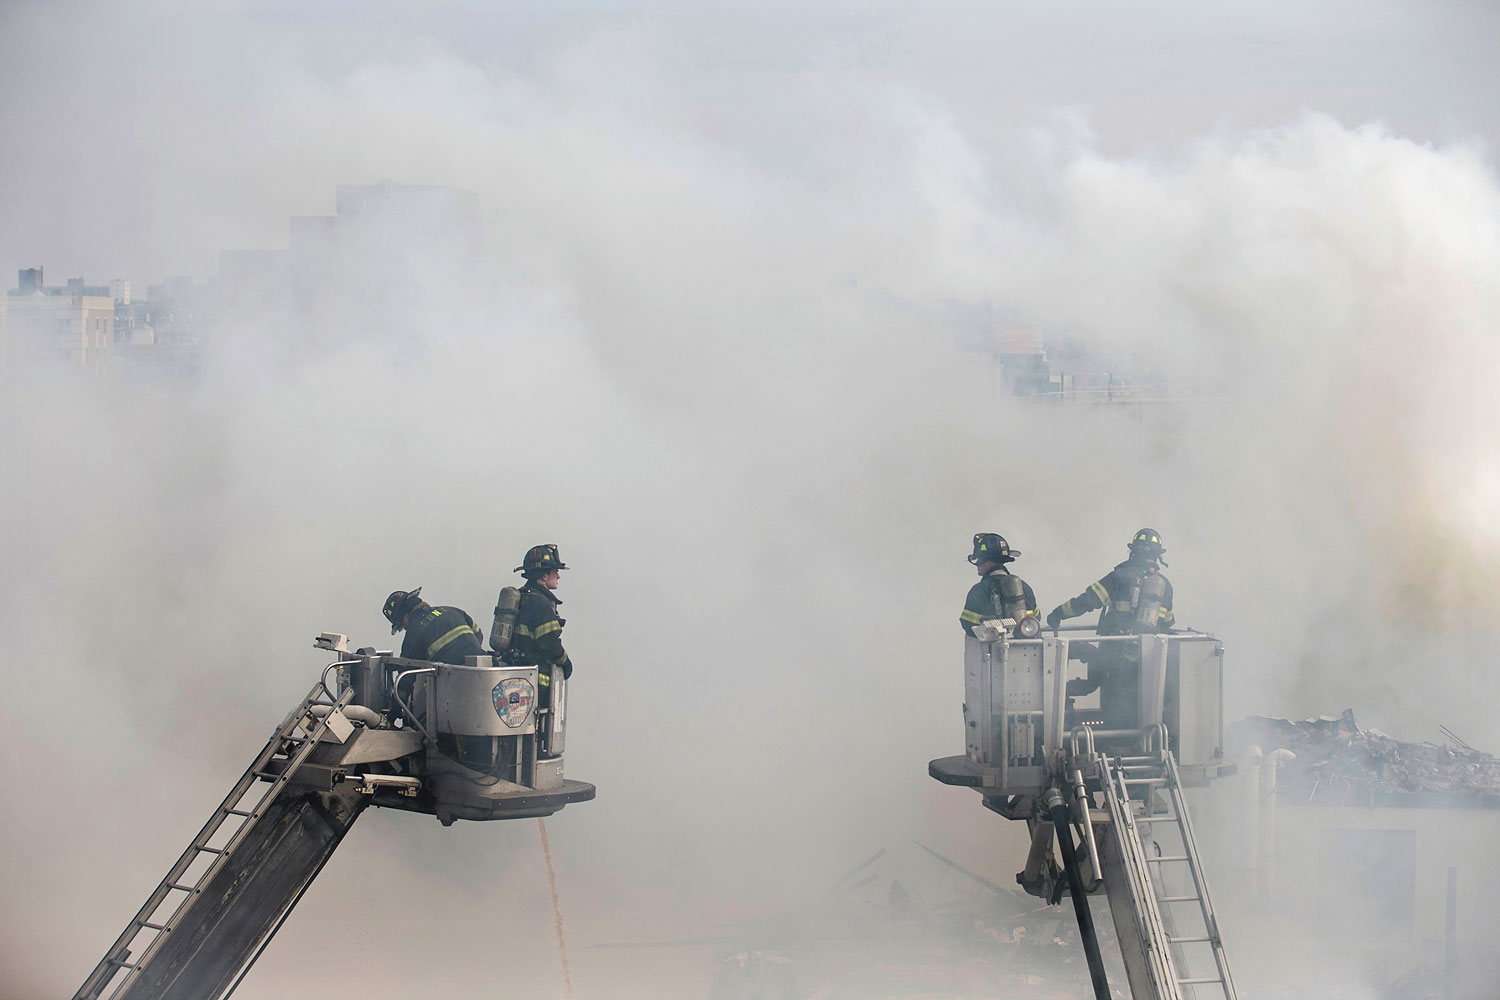 Firefighters respond to an explosion that leveled two apartment buildings in the East Harlem neighborhood of New York, March 12, 2014. (John Minchillo—AP)